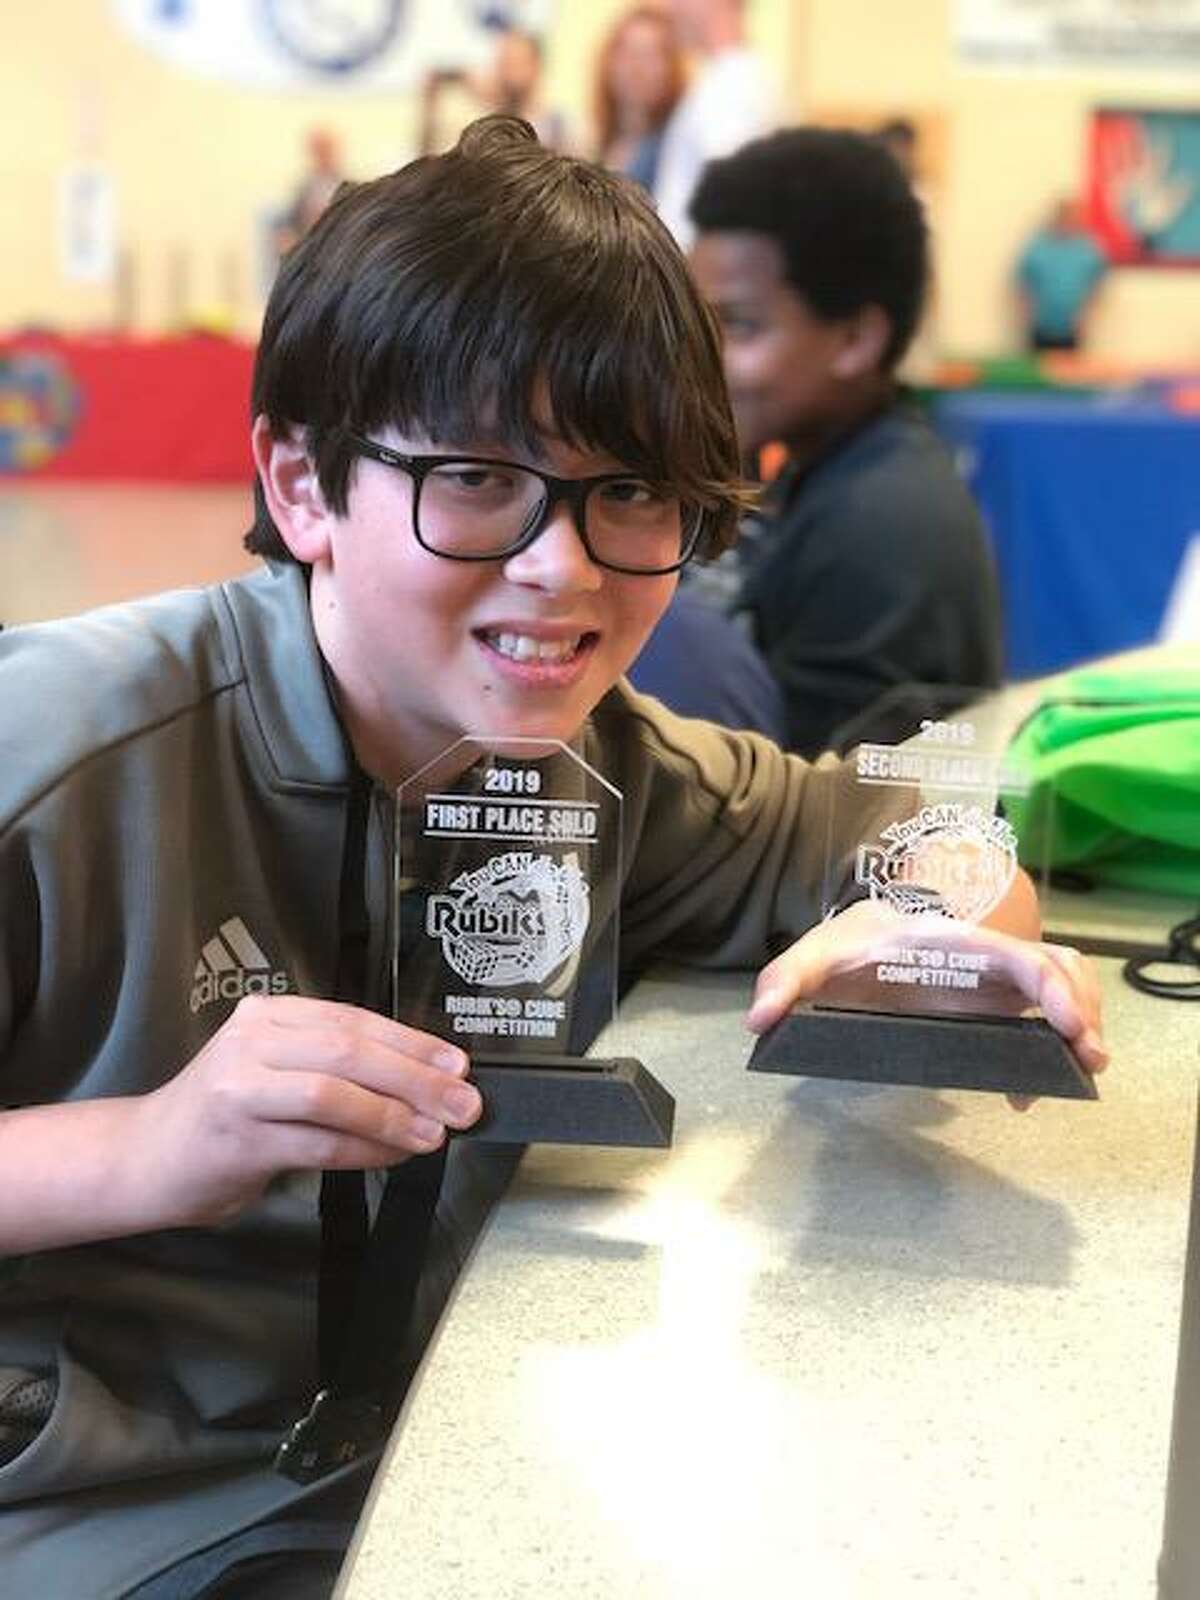 Macdonough Elementary School Rubik’s Cube competitor Rye Antonio solved the three-dimensional puzzle in 17.9 seconds.